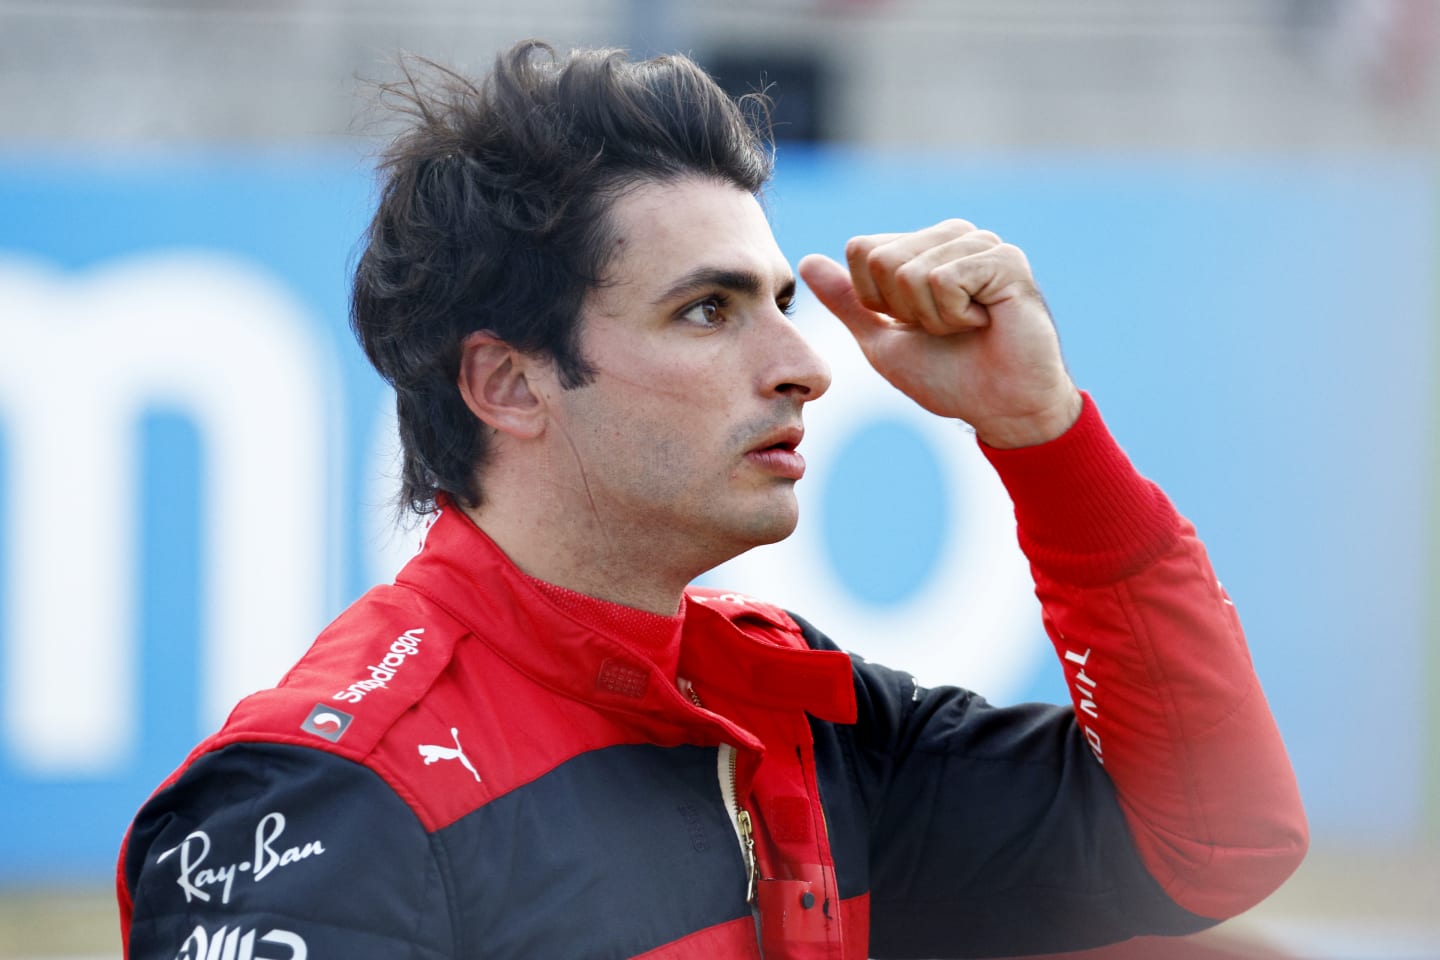 AUSTIN, TEXAS - OCTOBER 22: Pole position qualifier Carlos Sainz of Spain and Ferrari looks on in parc ferme during qualifying ahead of the F1 Grand Prix of USA at Circuit of The Americas on October 22, 2022 in Austin, Texas. (Photo by Jared C. Tilton/Getty Images)